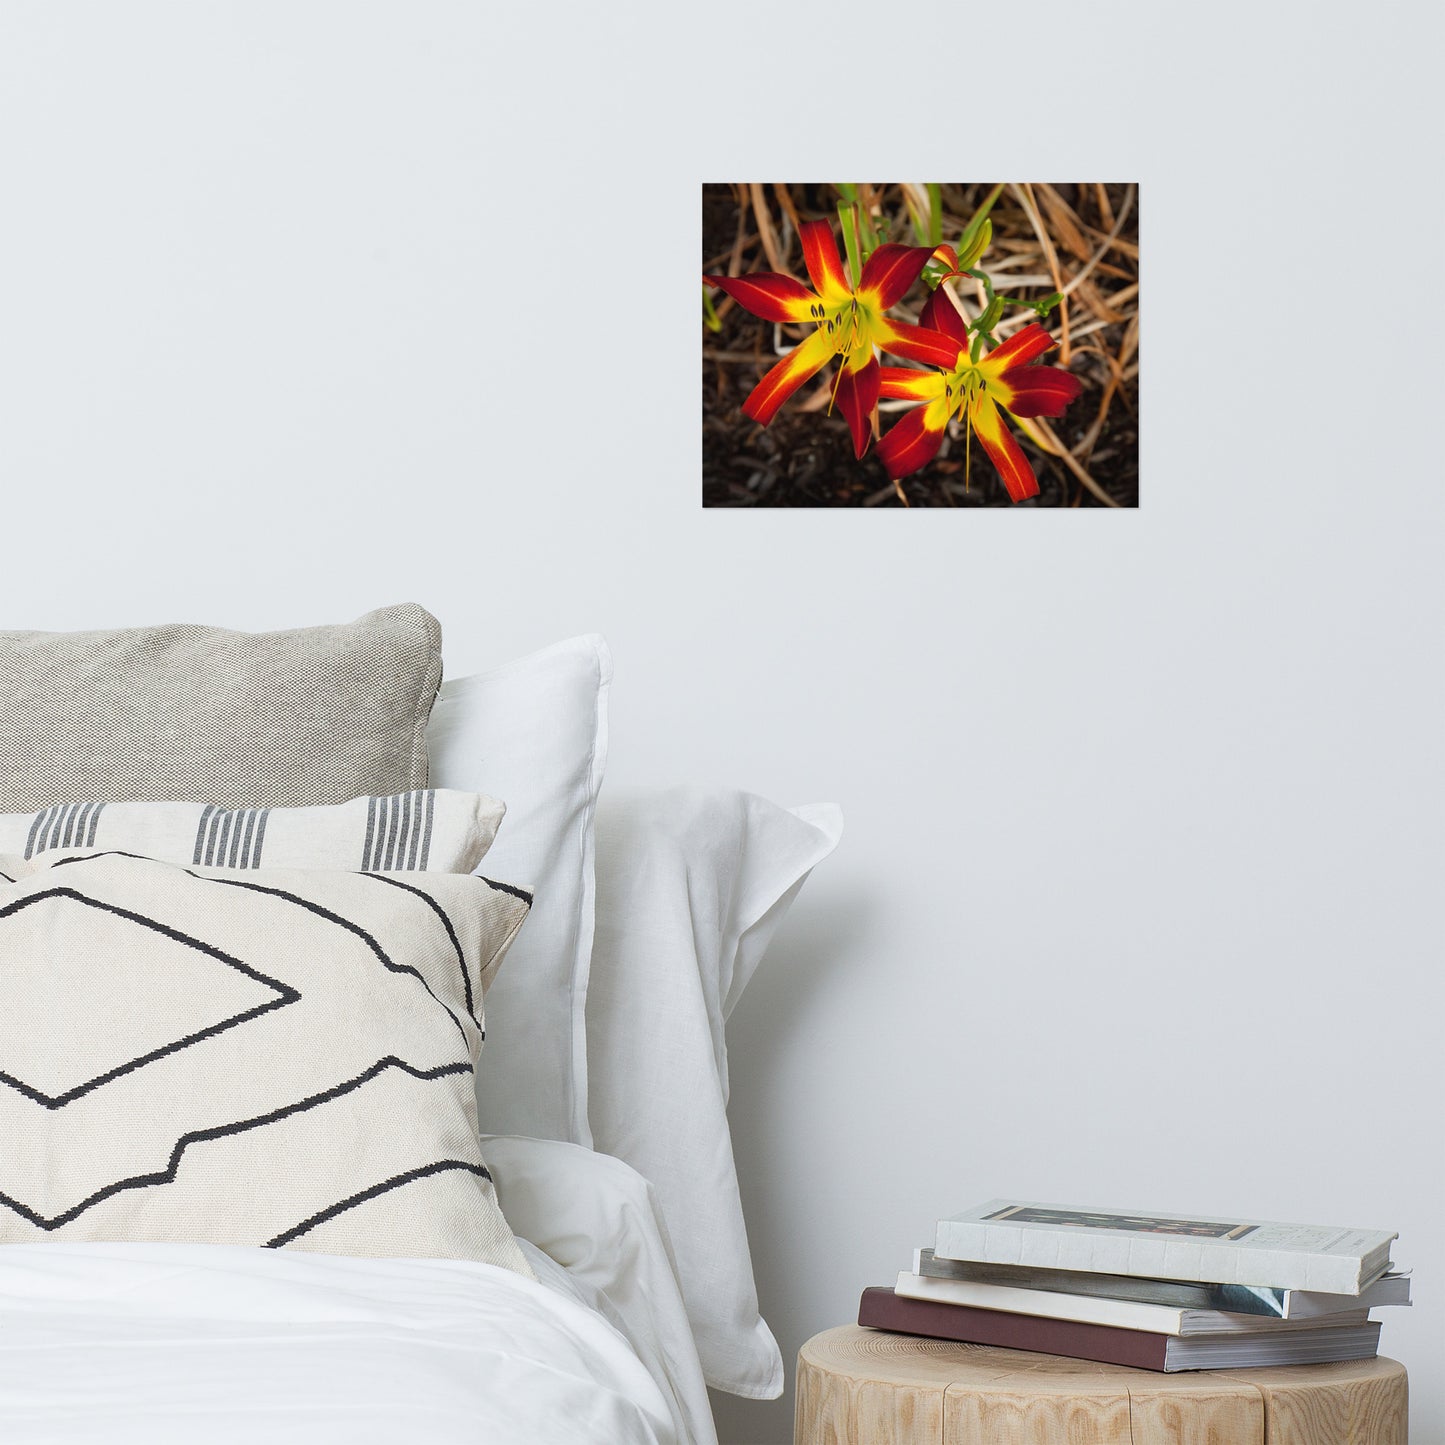 Royal Sunset Lily Floral Nature Photo Loose Unframed Wall Art Prints